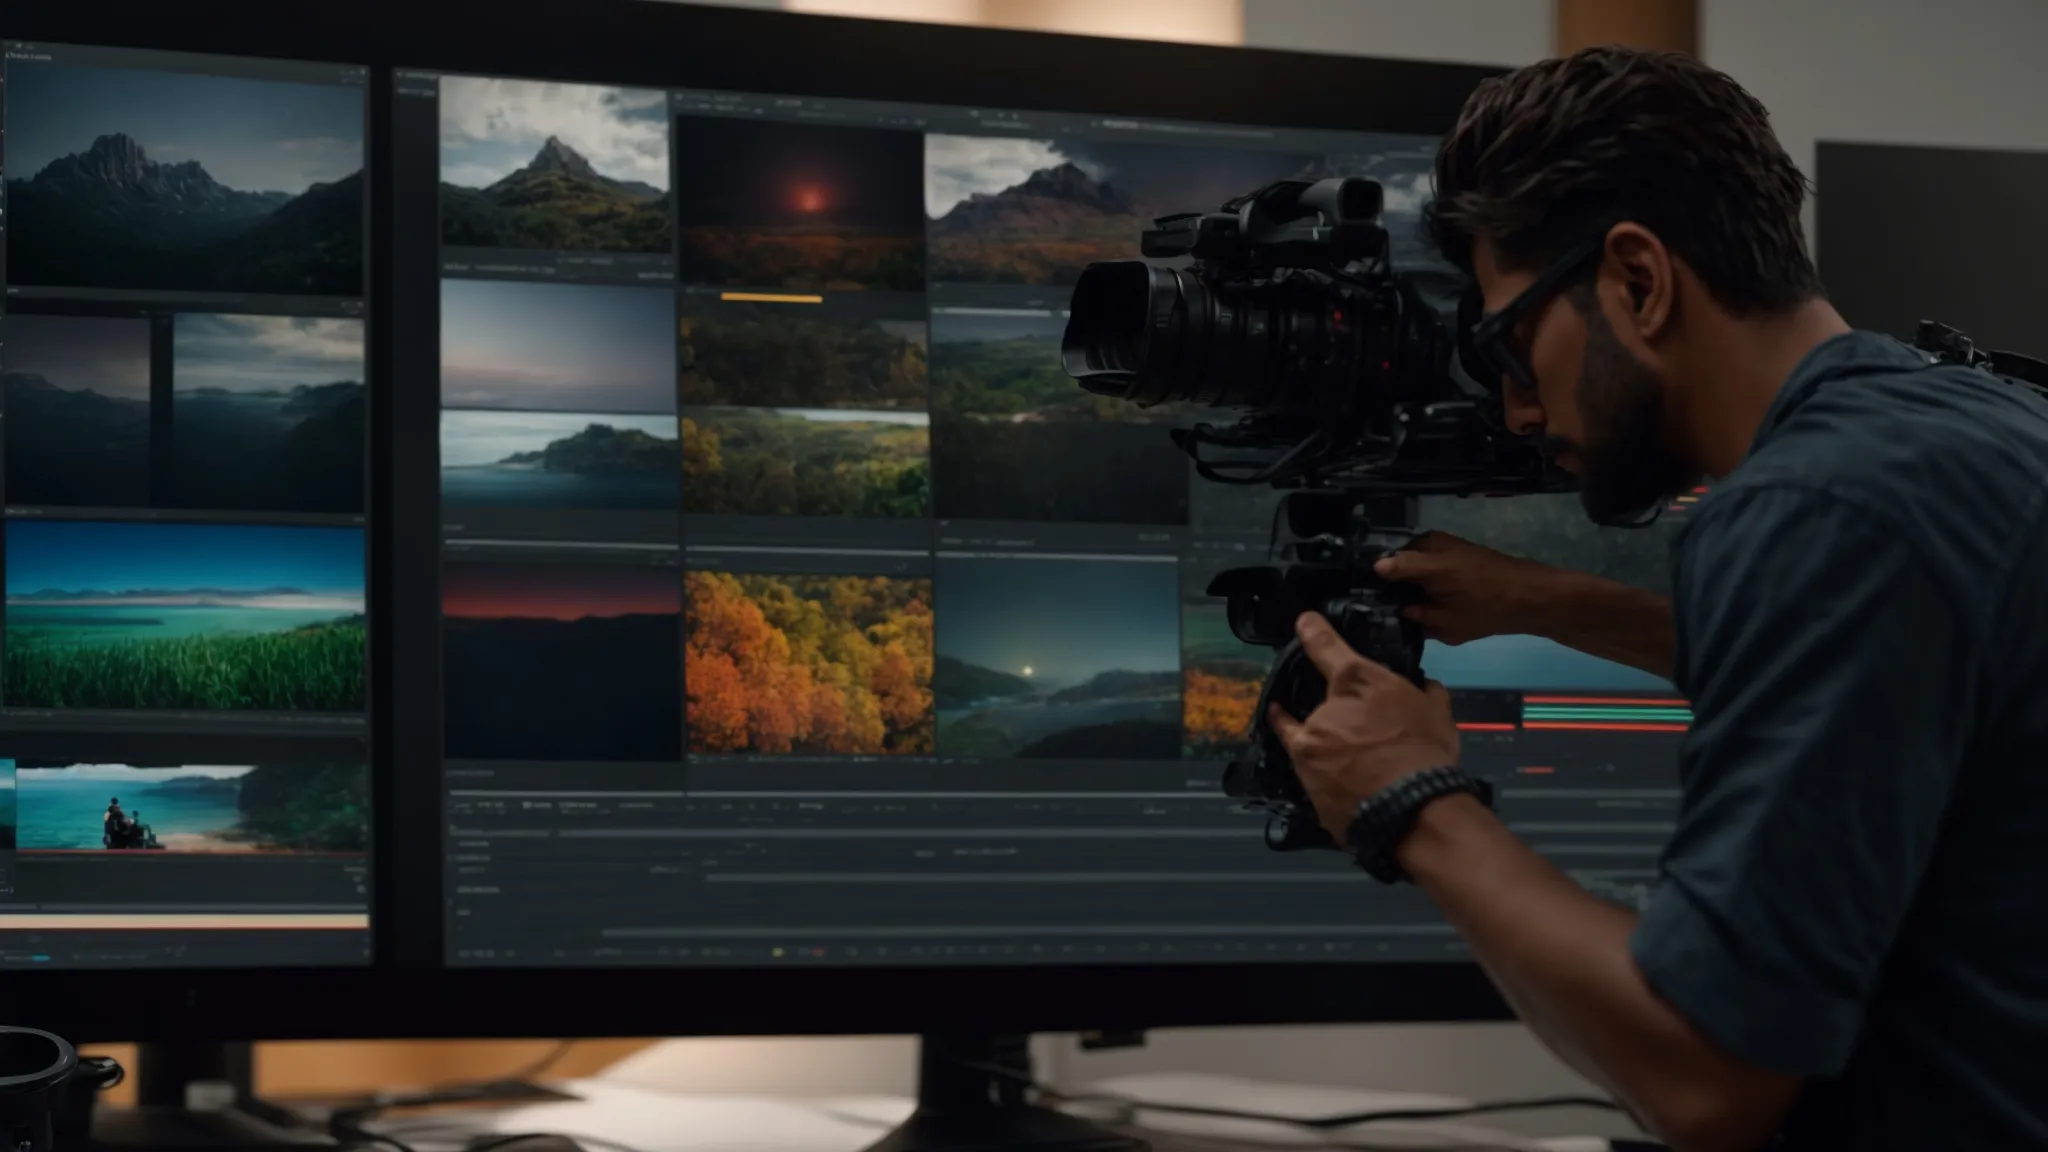 a filmmaker adjusts vibrant colors on a large monitor displaying a cinematic scene, using davinci resolve interface.